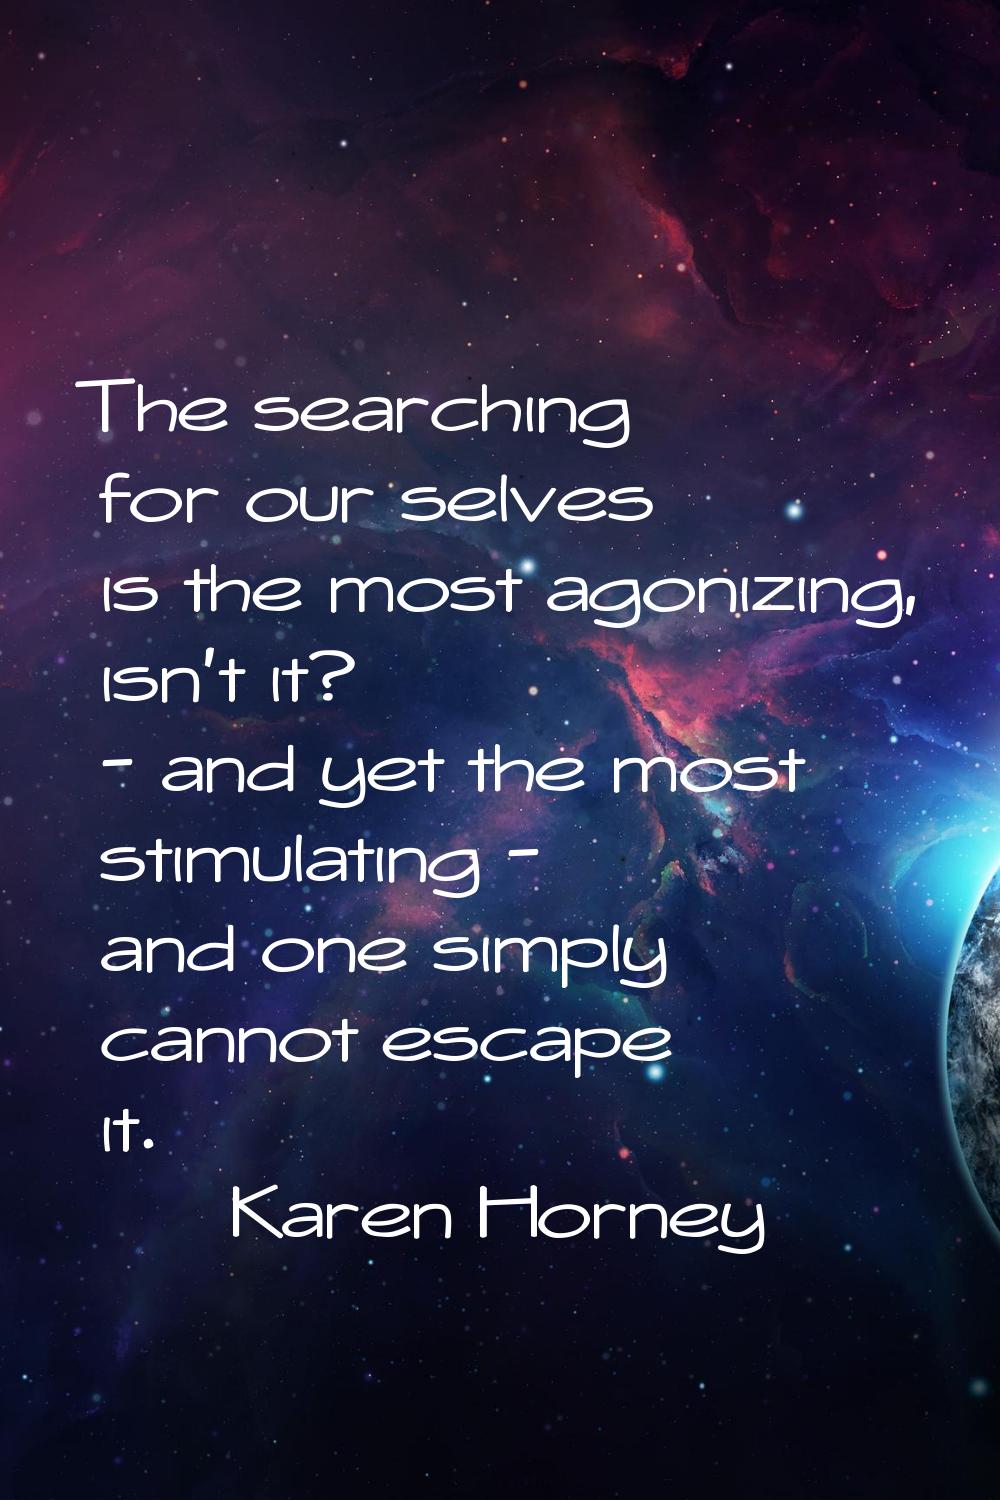 The searching for our selves is the most agonizing, isn't it? - and yet the most stimulating - and 